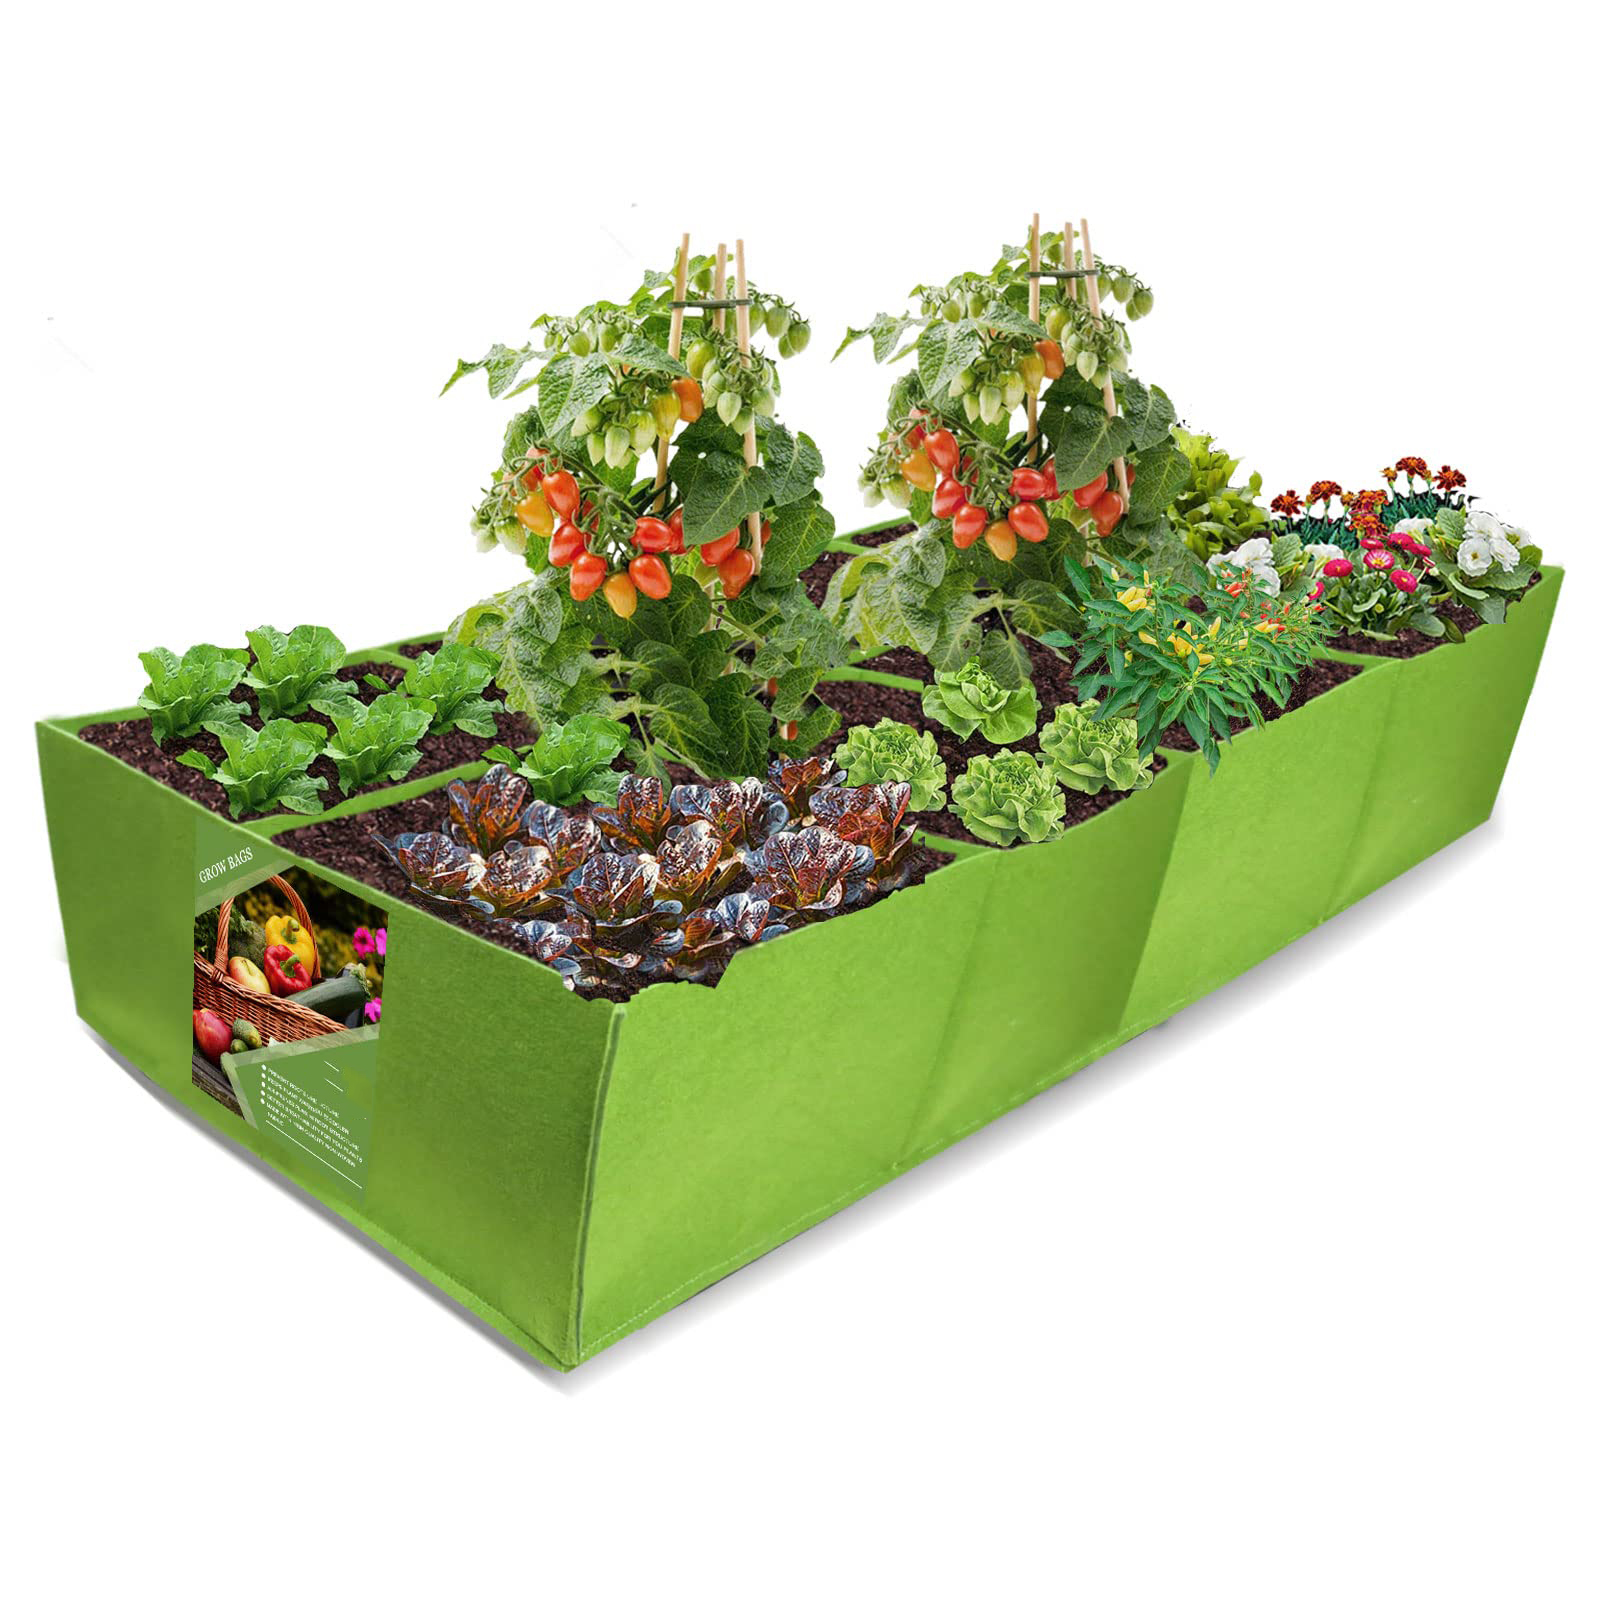 High Performance Plant Green Wall - Fabric raised garden bed square plant growth bag Large durable rectangular reusable vegetable breathing cloth container 4 mesh reusable – Junhang